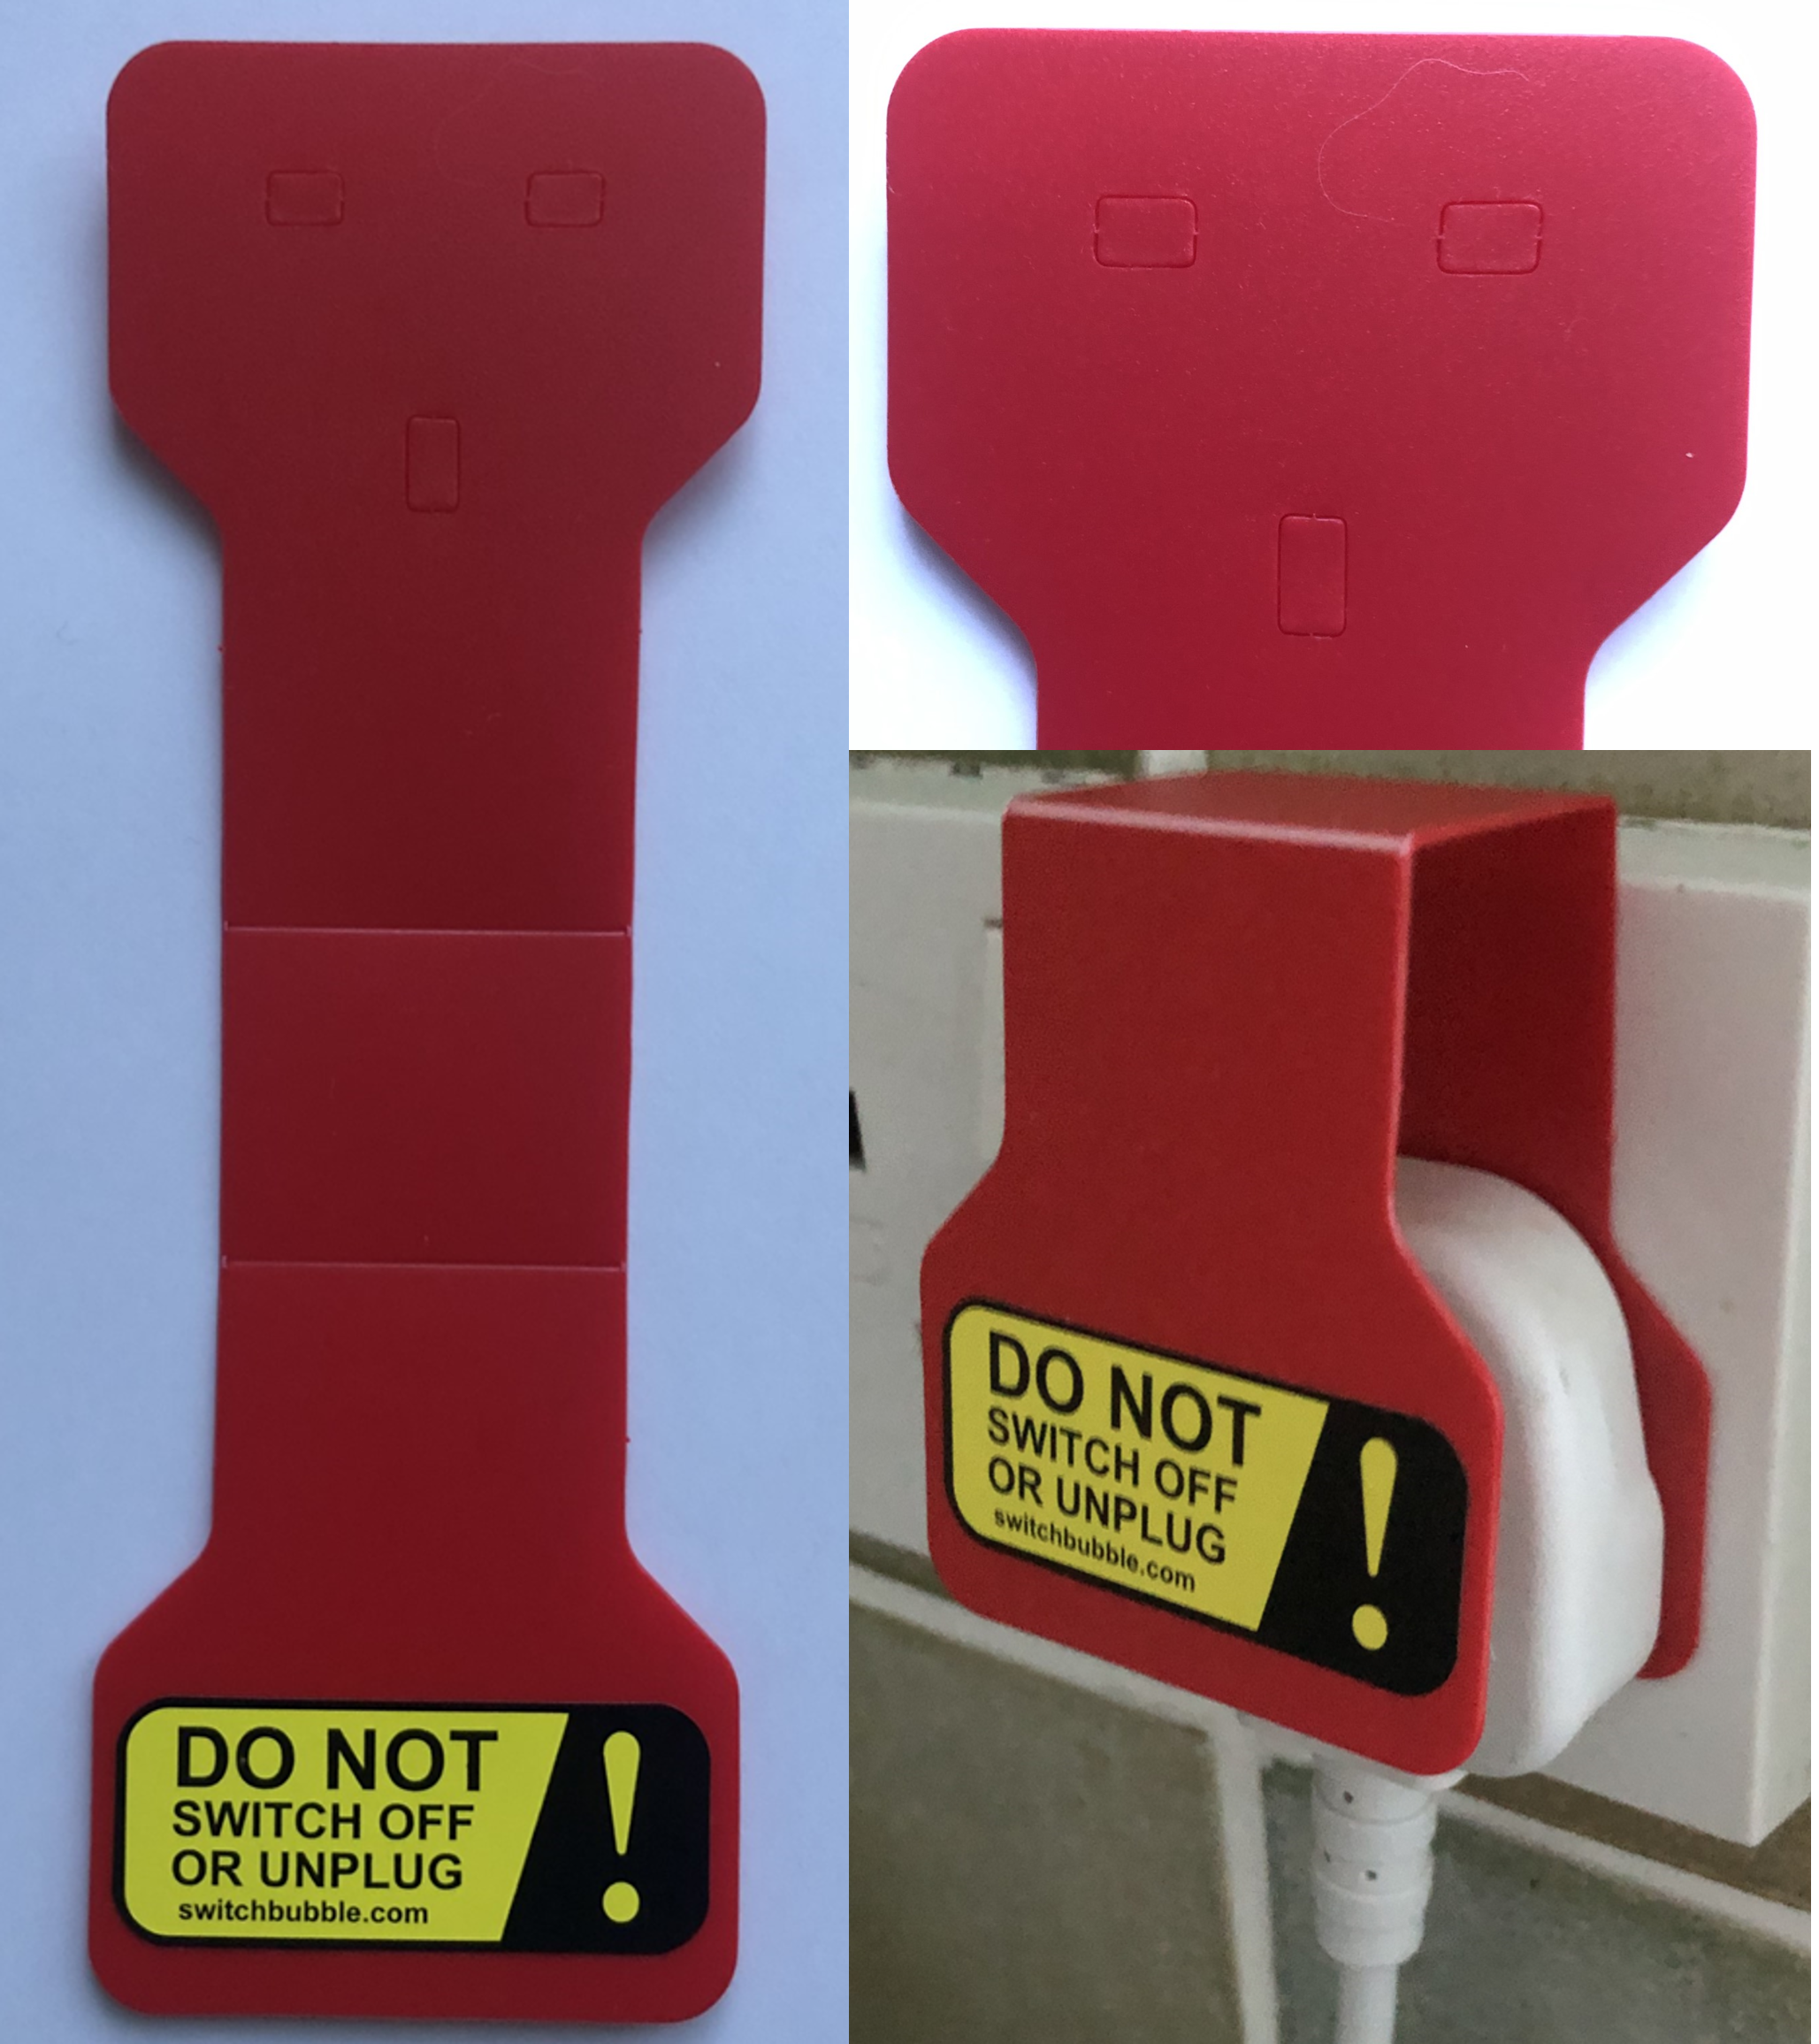 Multi pack (quantity 25) Wrap-around Plug Power Protectors in red. Price (inc VAT & delivery):